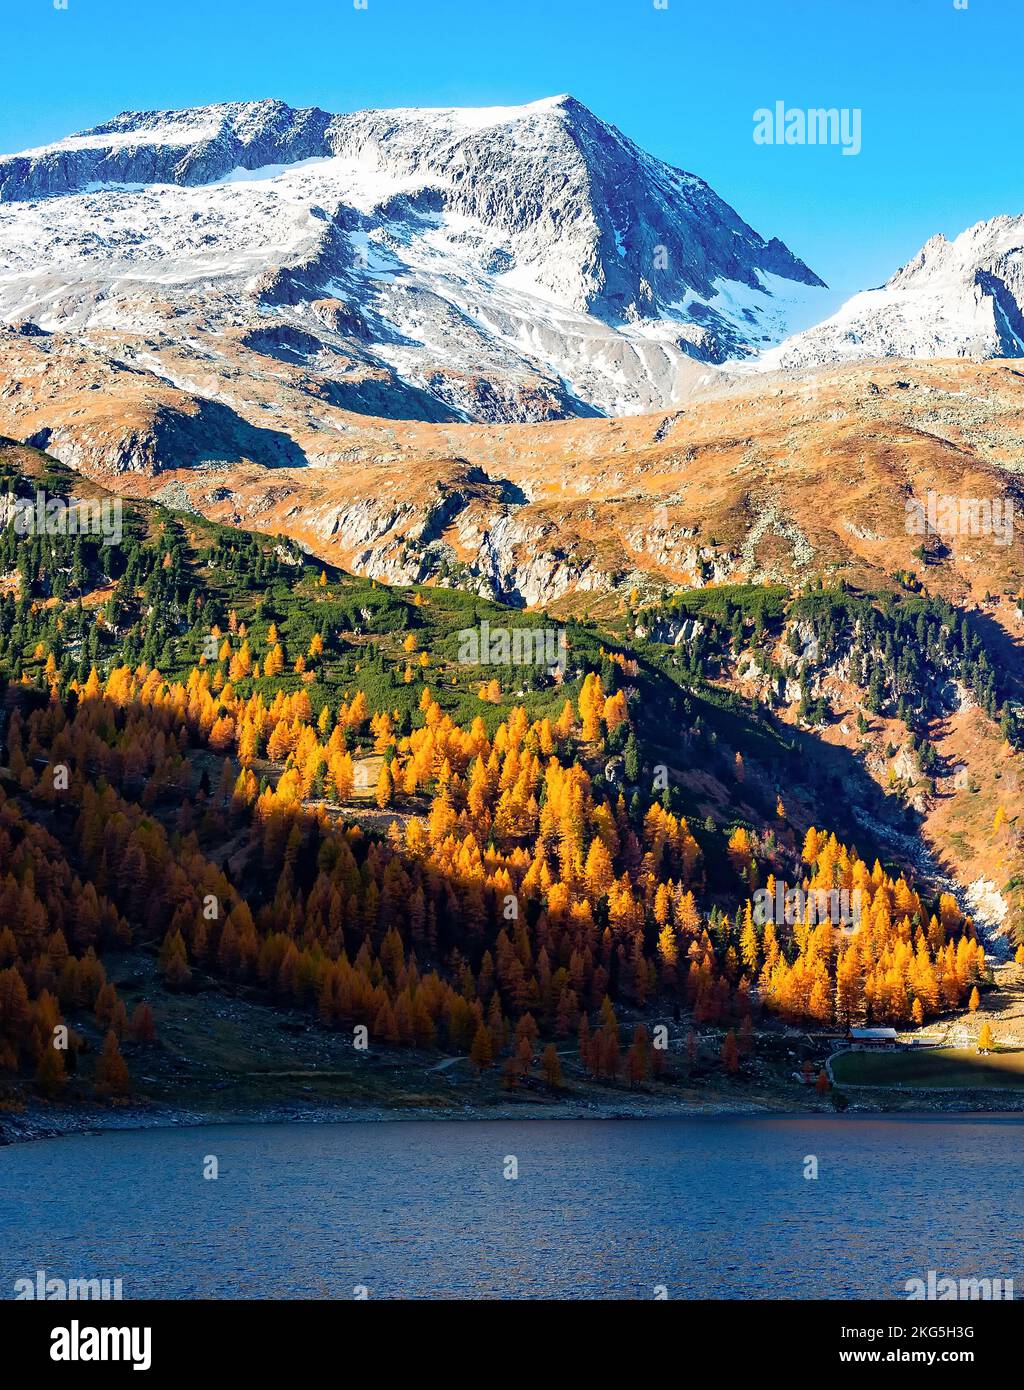 Alps landscape, mountains in evening sunshine and lake, Austria Stock Photo